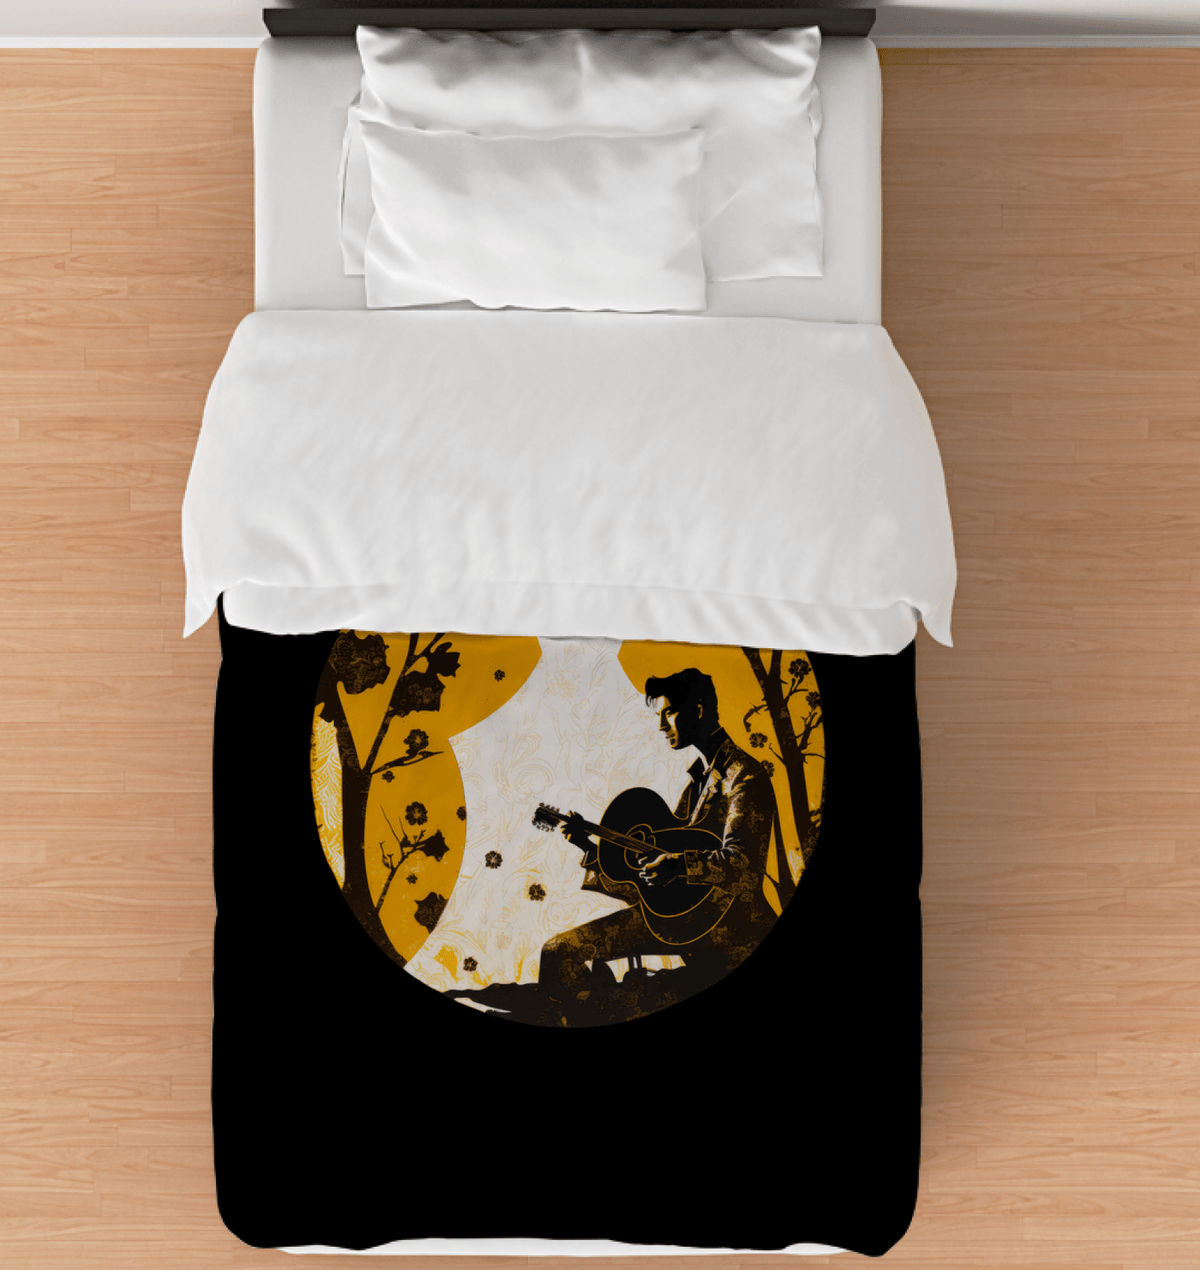 Symphony of Sleep Bedding Collection - Beyond T-shirts